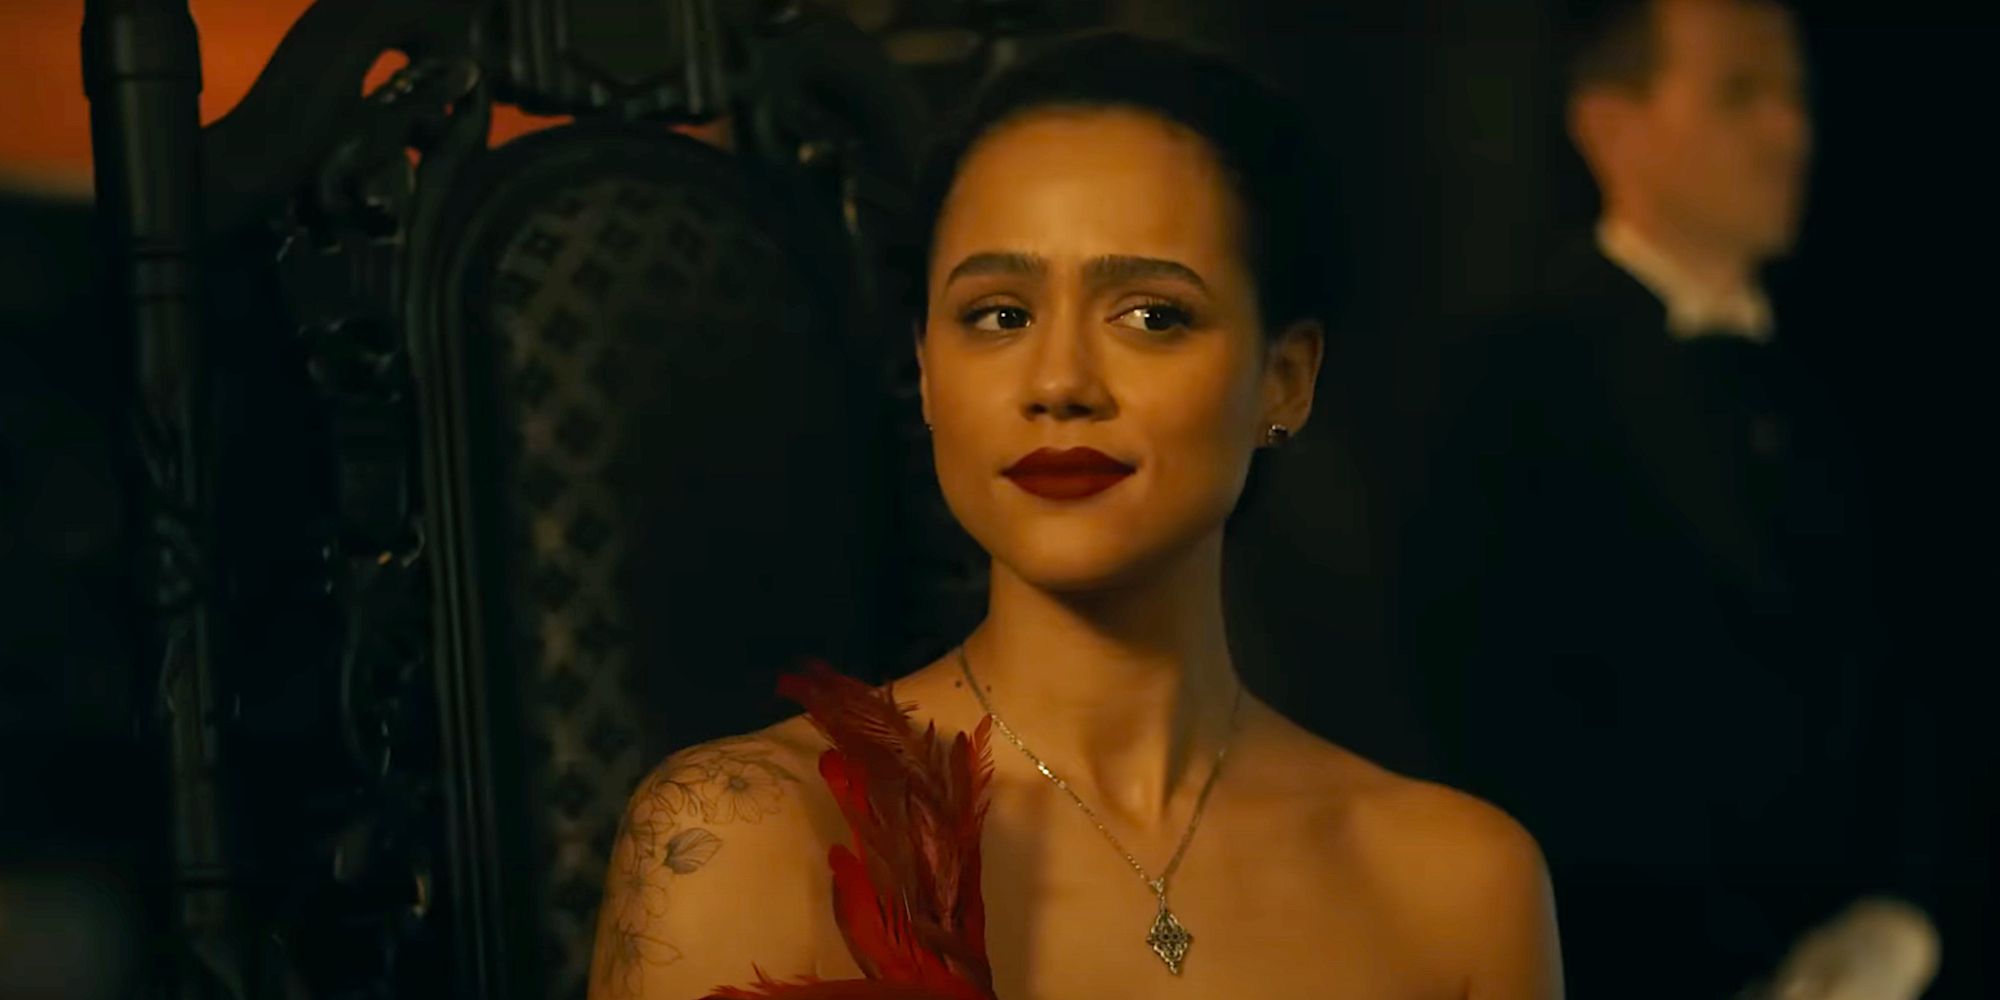 Nathalie Emmanuel as Evie in The Invitation